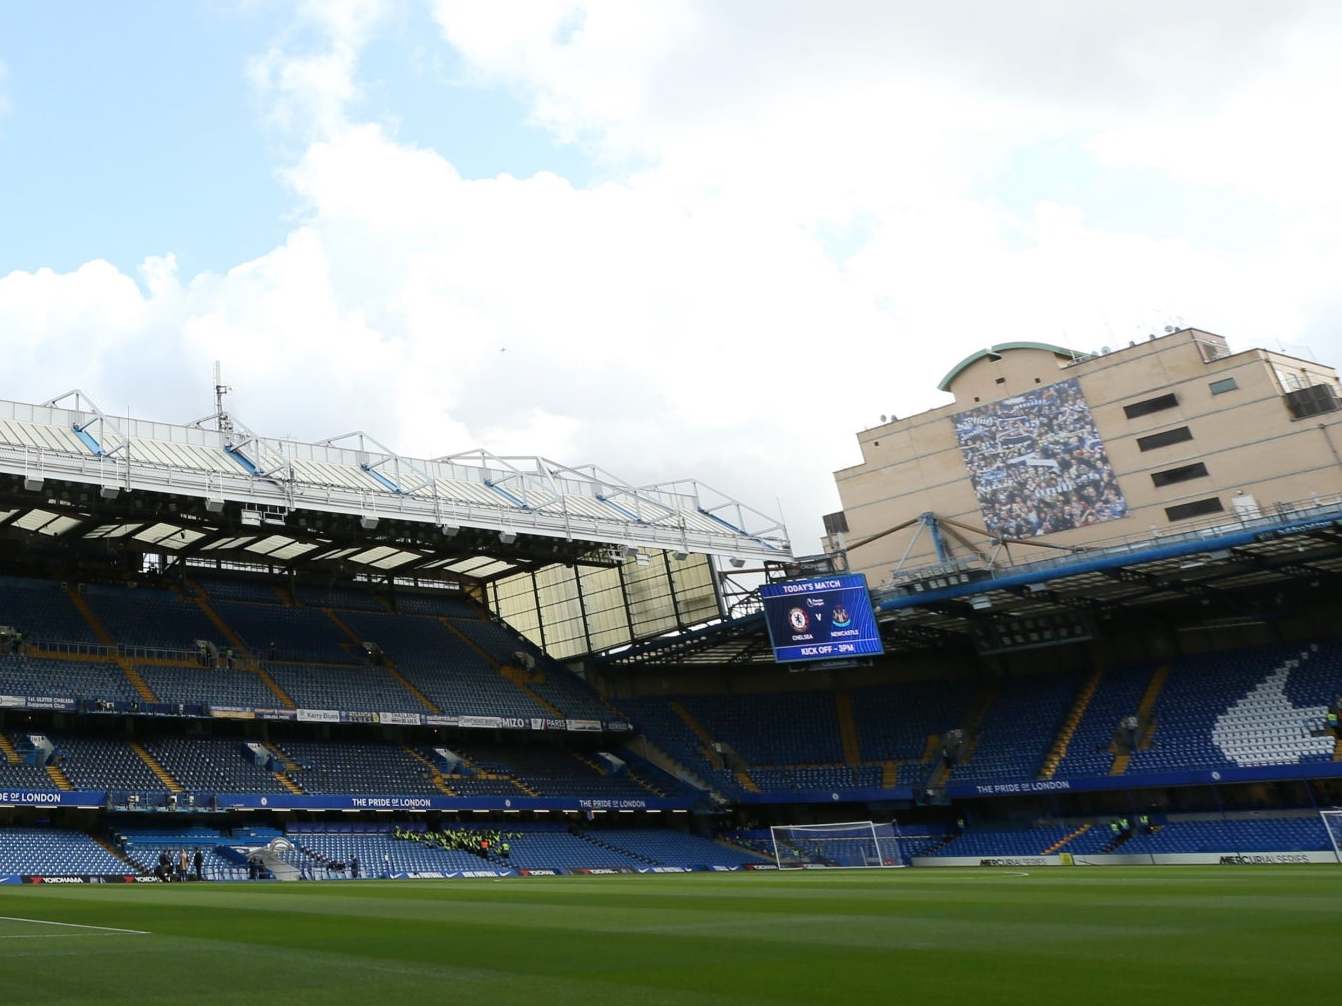 Chelsea vs Manchester United LIVE: Score, goals and latest updates from